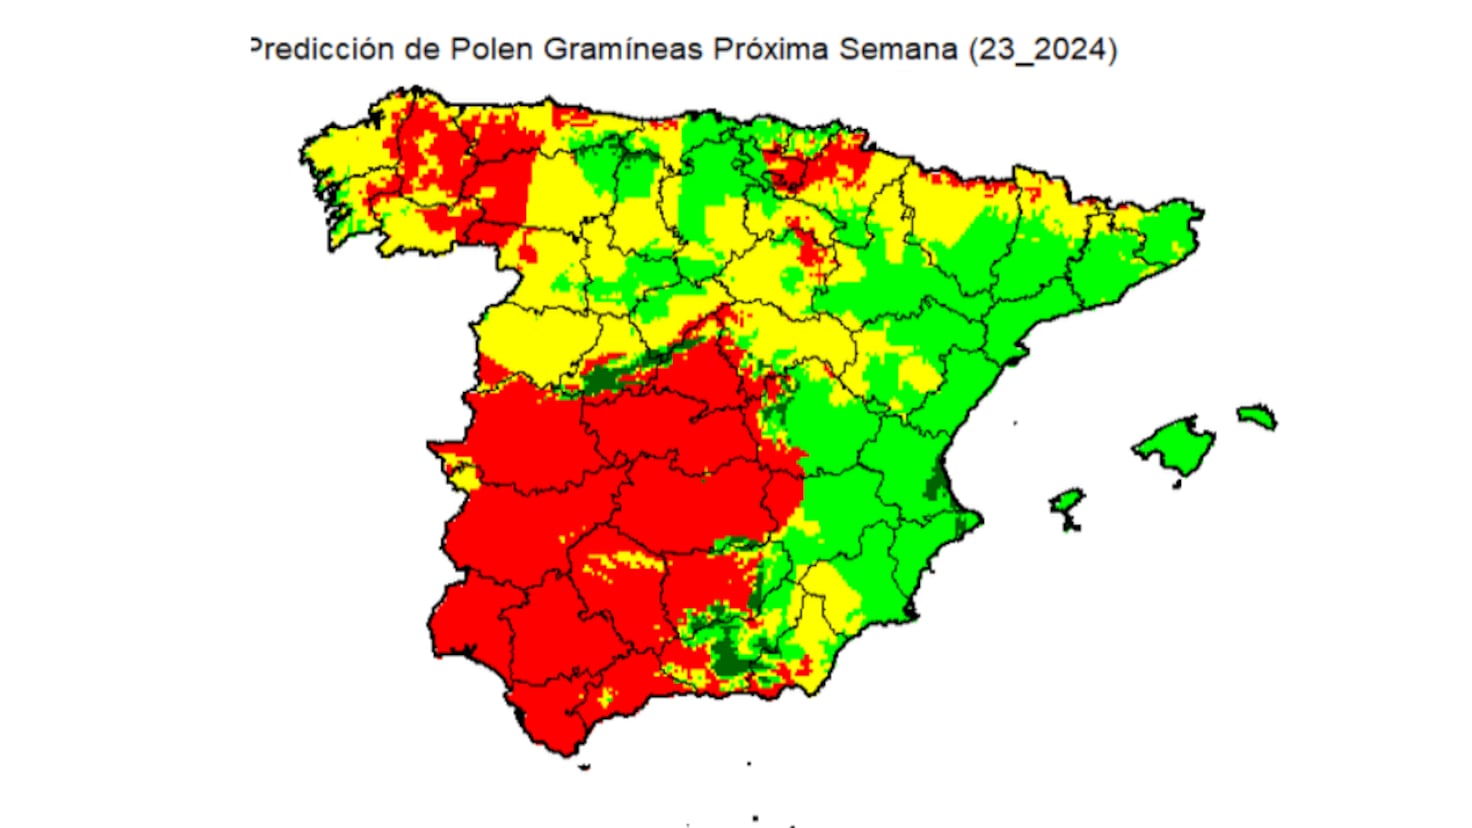  Are you allergic?  These are the grass levels in Spain for the first week of June
